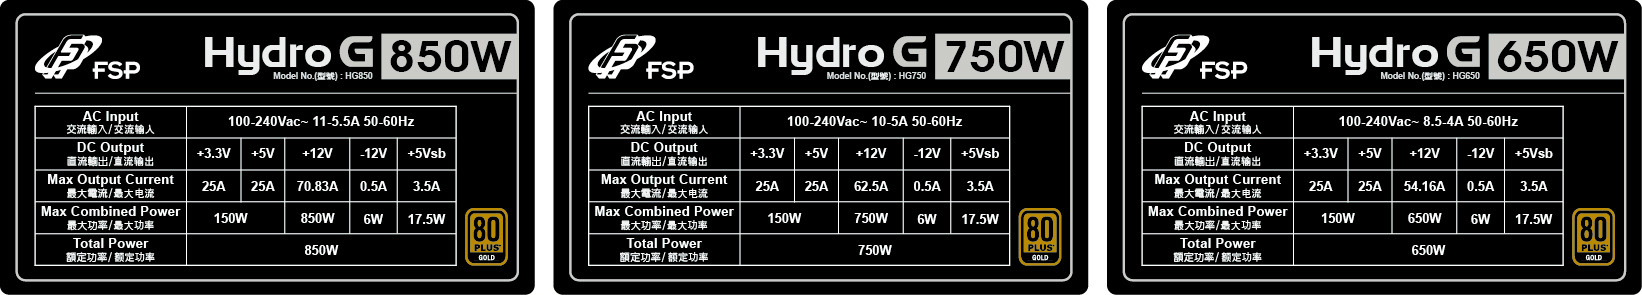 FSP Hydro G Series Rating